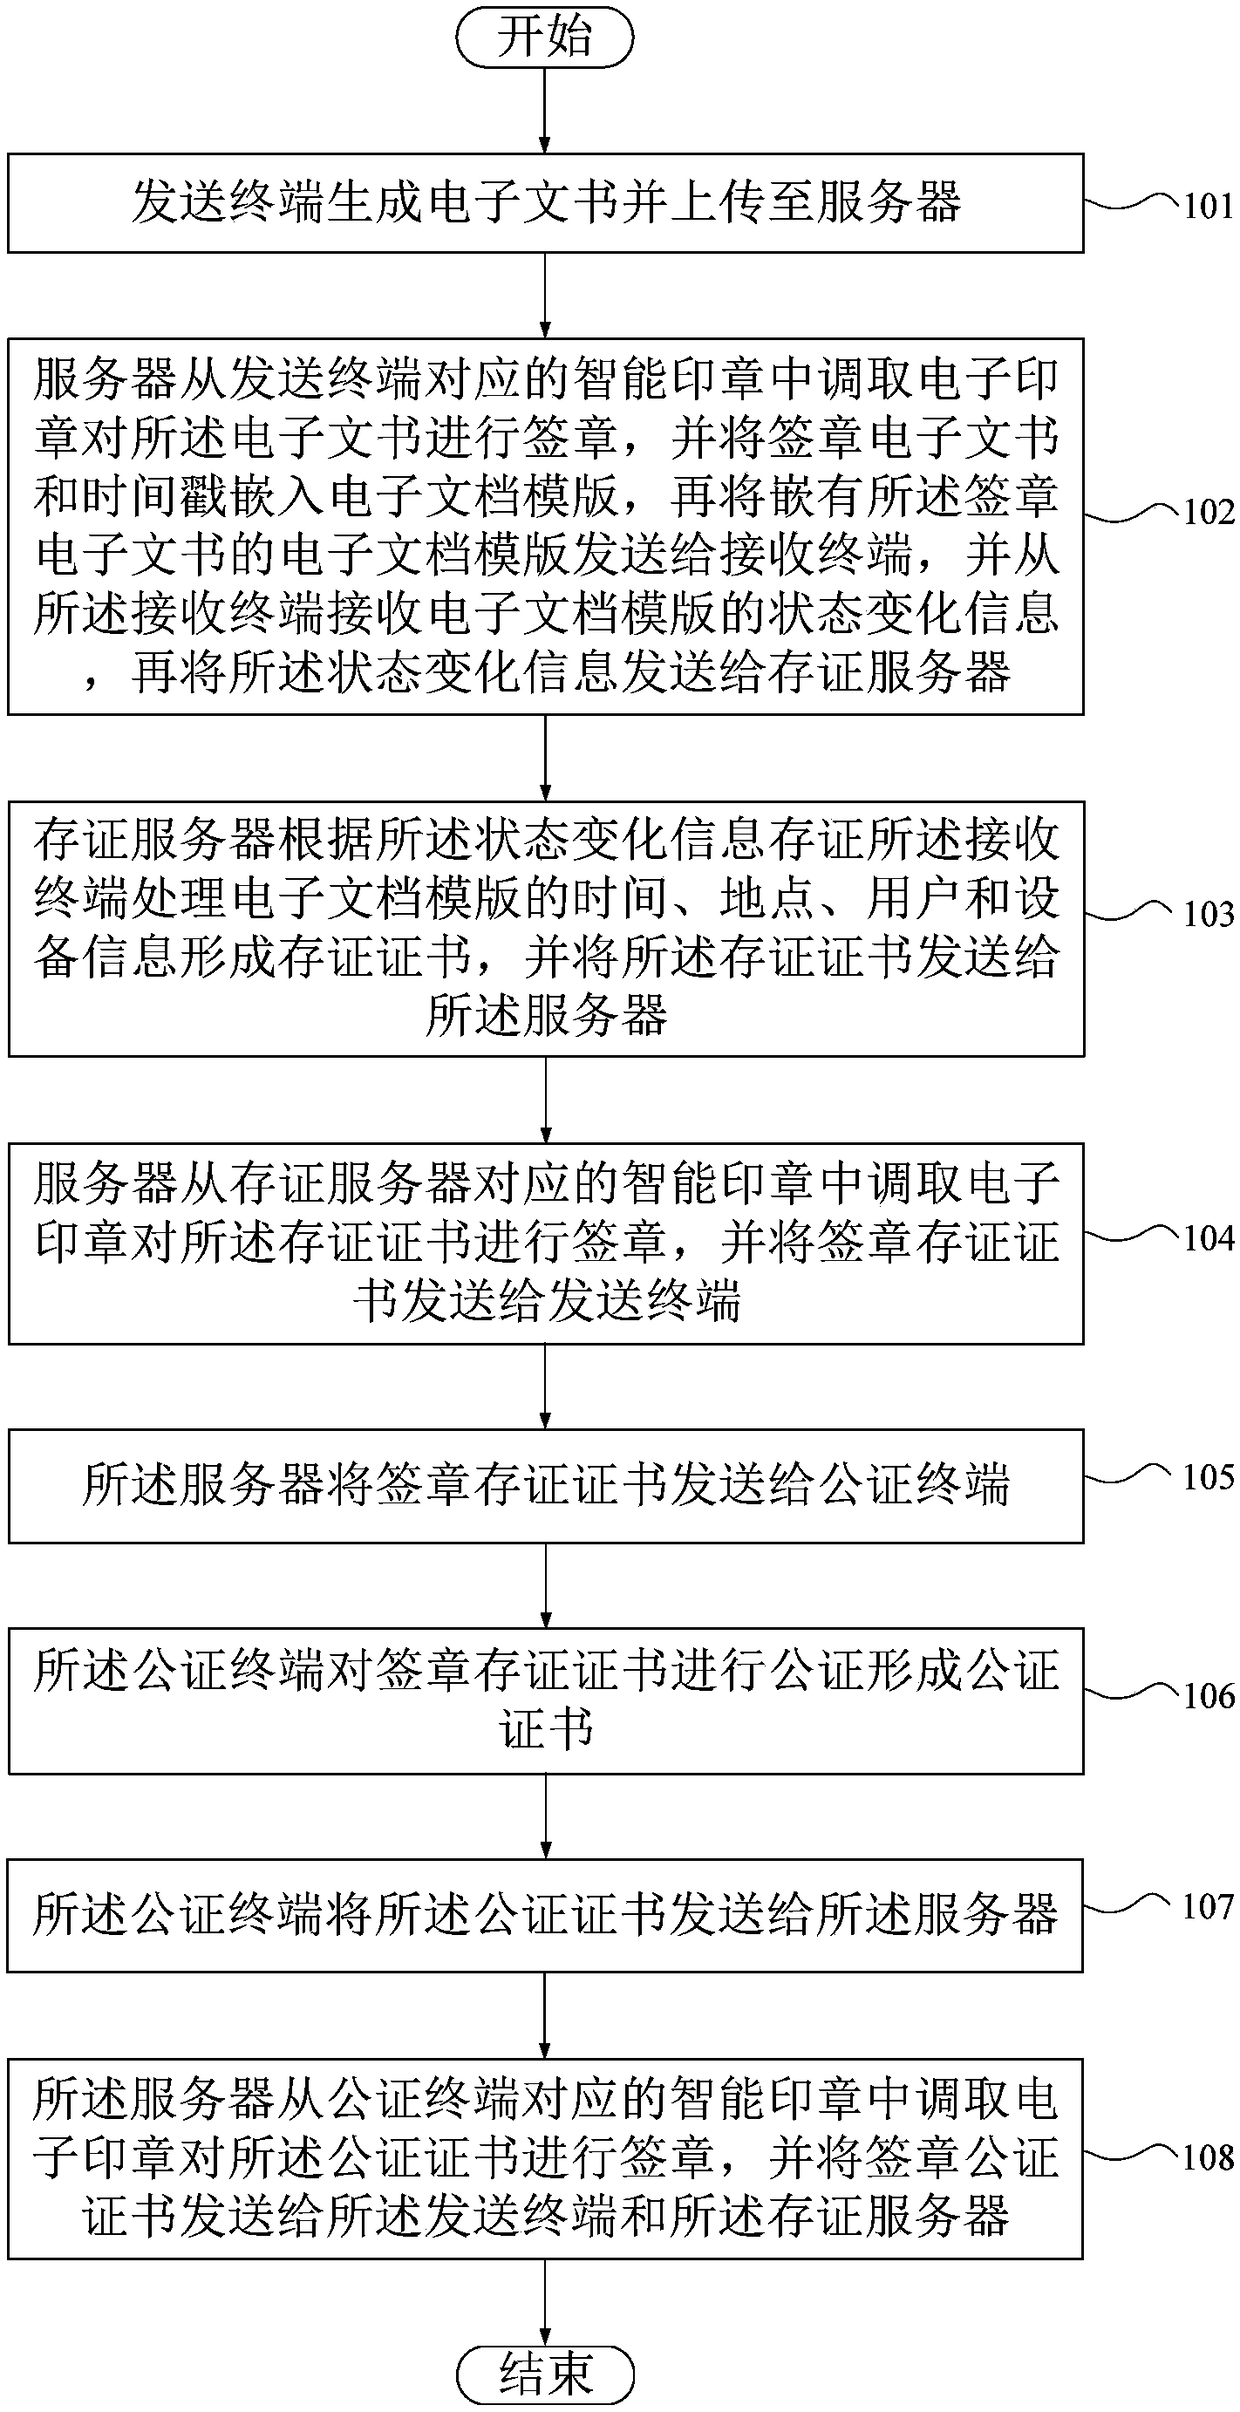 Method and system for confirming delivery of electronic document, computer storage medium